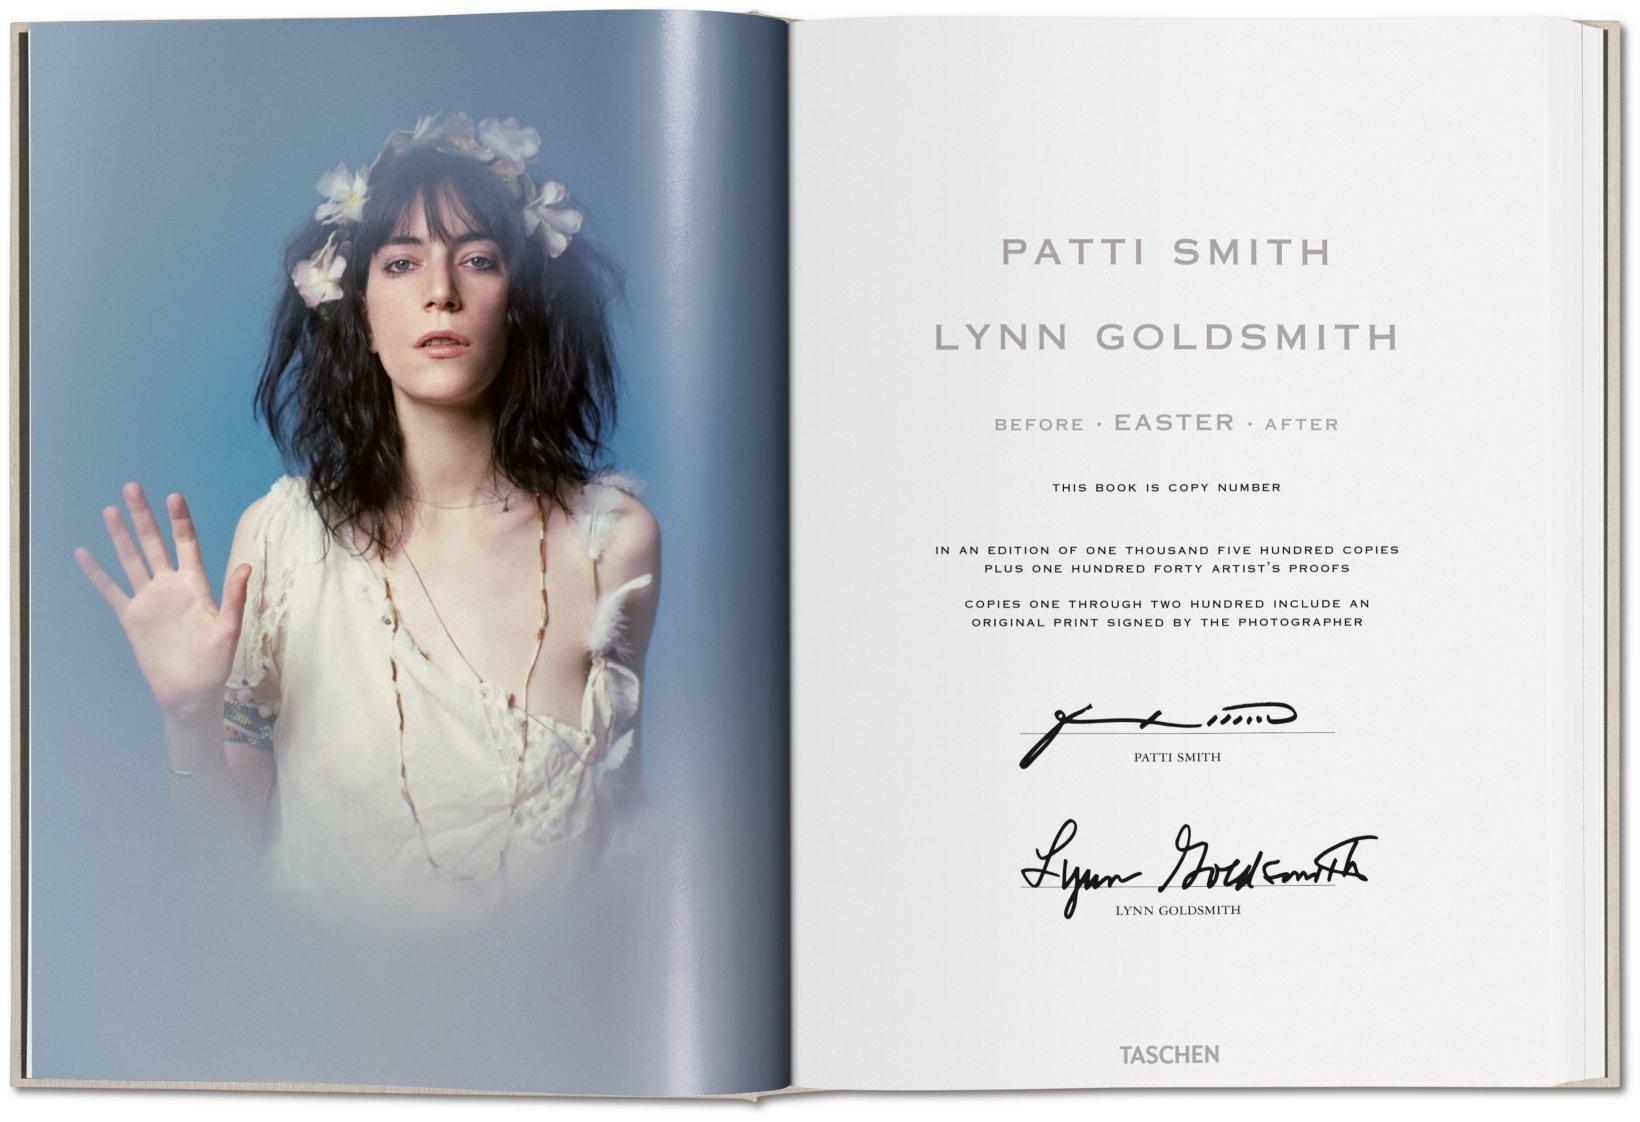 An intimate visual survey of the unparalleled Patti Smith by Lynn Goldsmith, whose lens has immortalized a golden era of rock ’n’ roll history. With hundreds of unseen photographs and exclusive texts by Smith, this signed edition documents a